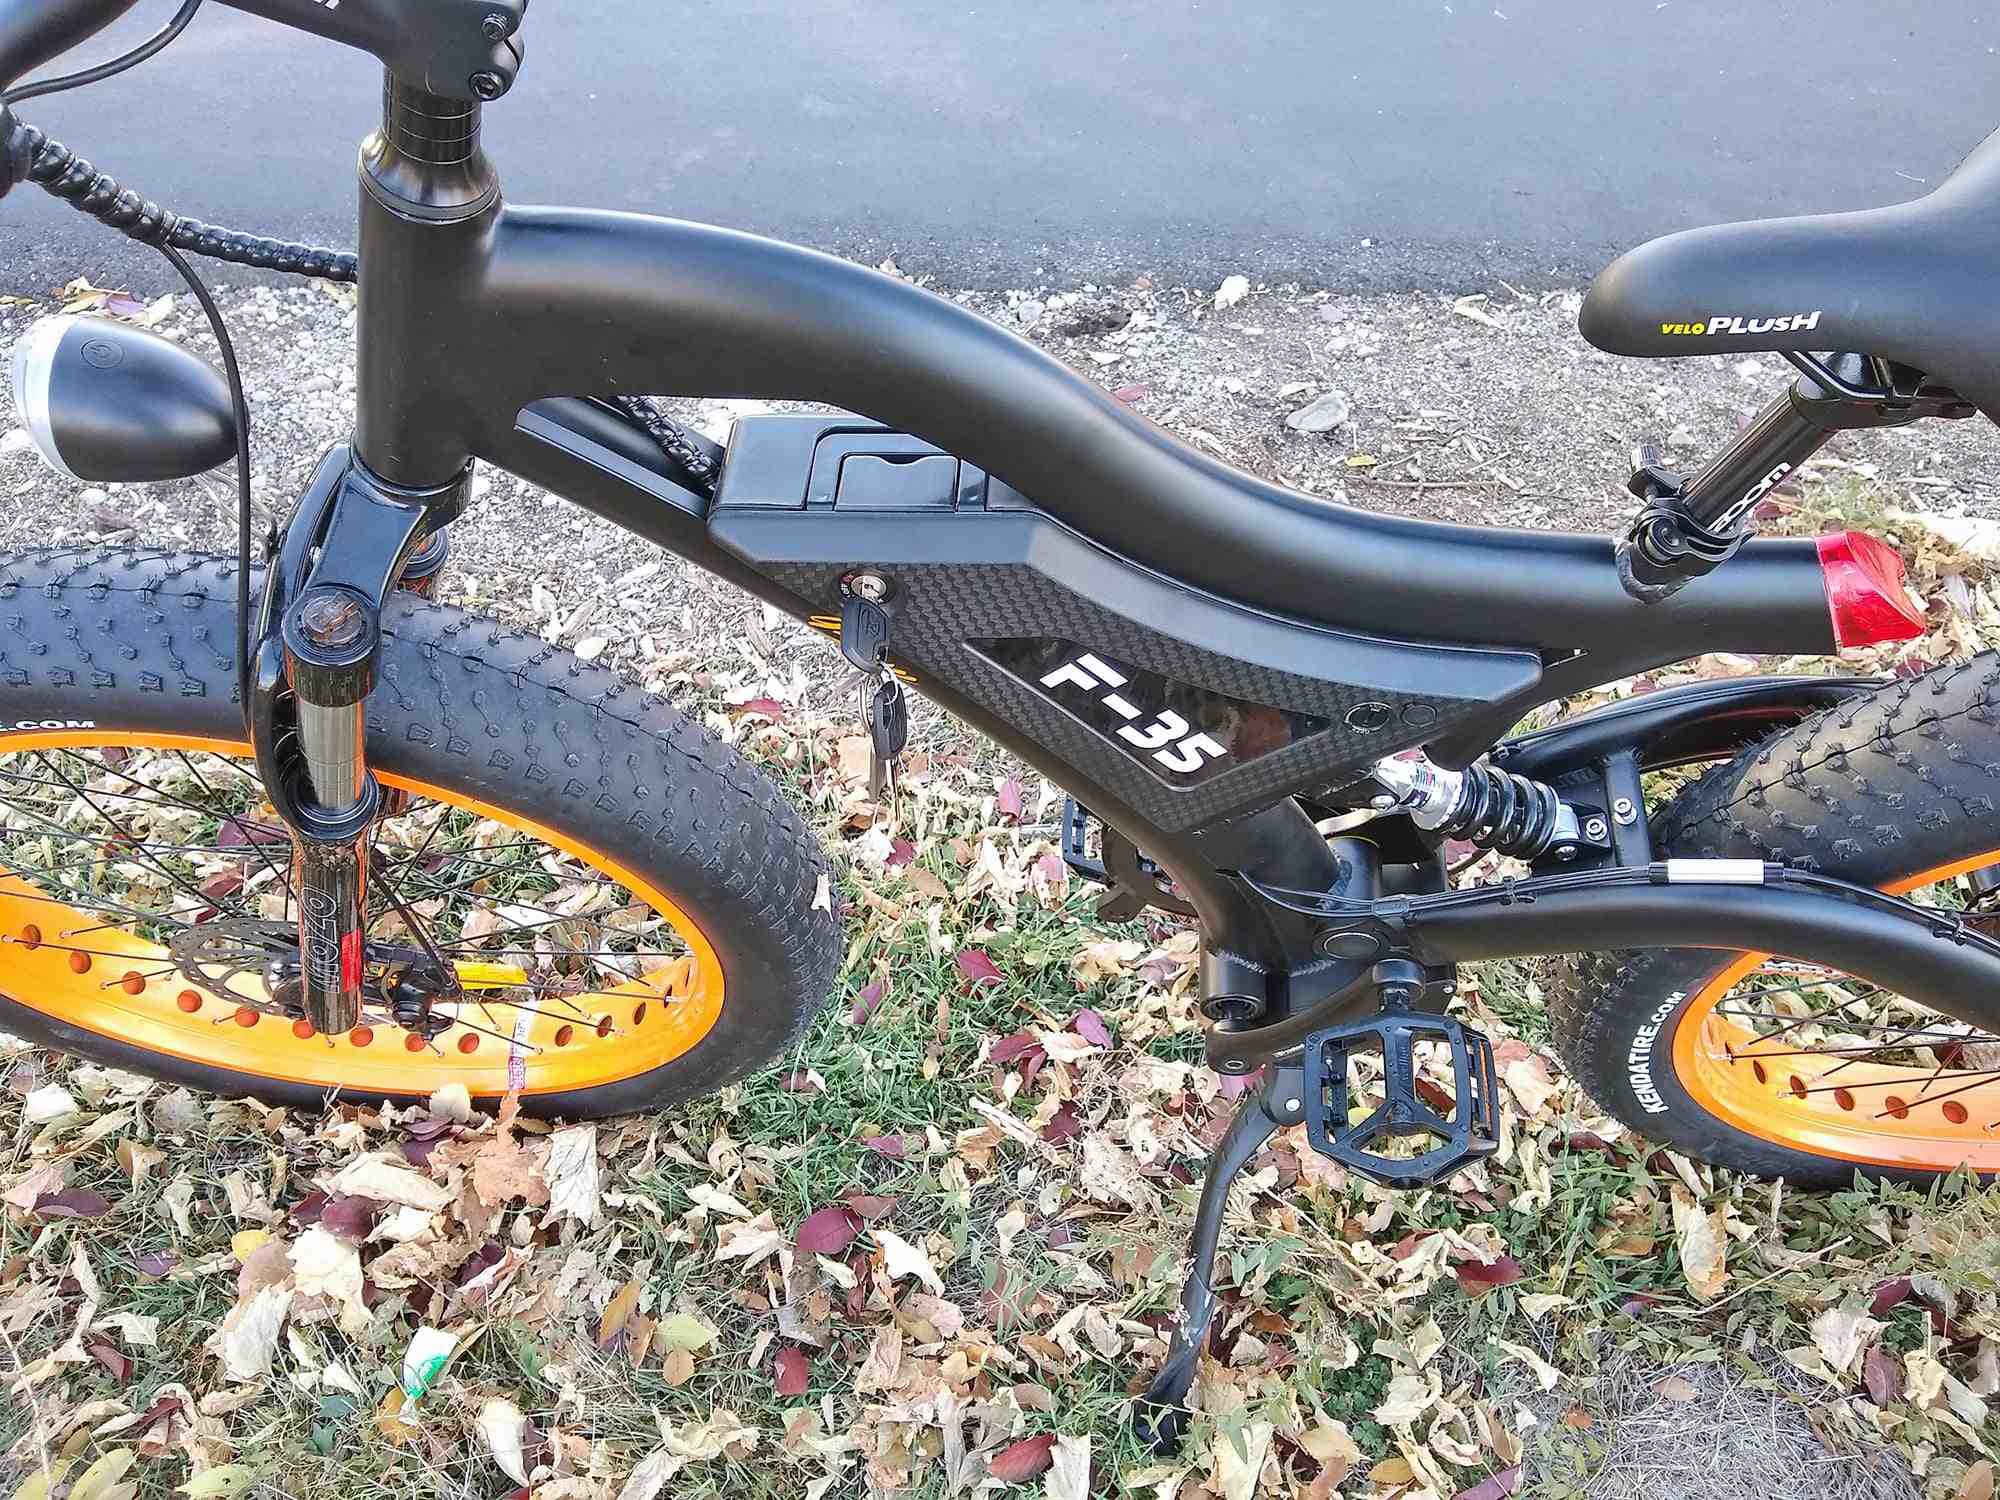 How far can an electric bike go on one charge?